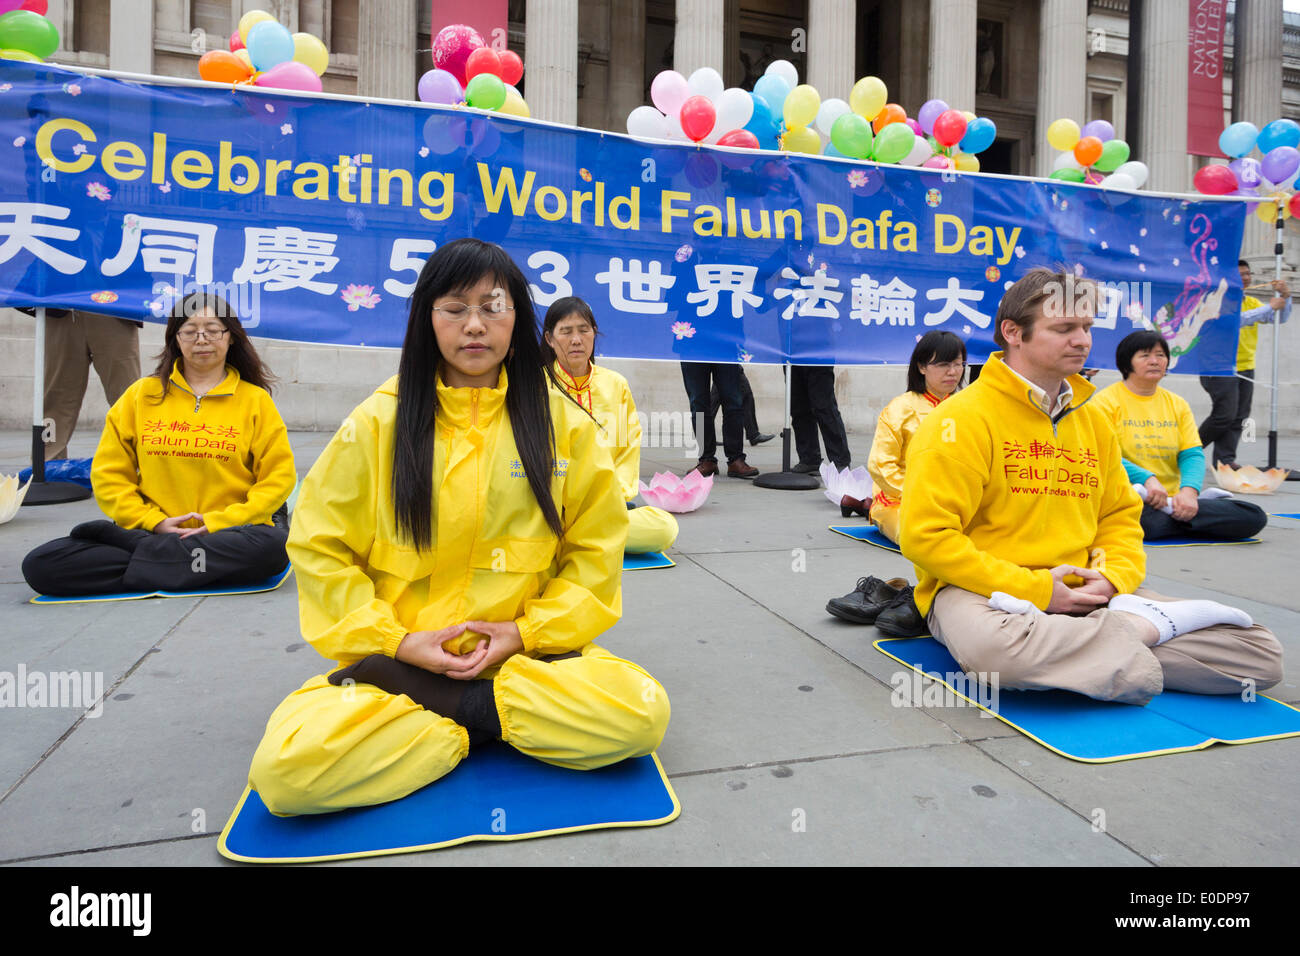 London, UK. 10 May 2014. Falun Dafa/Falun Gong Practitioners celebrate World Falun Dafa Day in London's Trafalgar Square. Falun Dafa is a different name for Falun Gong. Falun Gong is a traditional practive to improve body and mind and it was made public in China in 1992. Due to its popularity it was prohibited in 1999 and its members have since been persecuted and been subject to human rights abuse. The celebration is also a protest to raise awareness. Credit:  Nick Savage/Alamy Live News Stock Photo